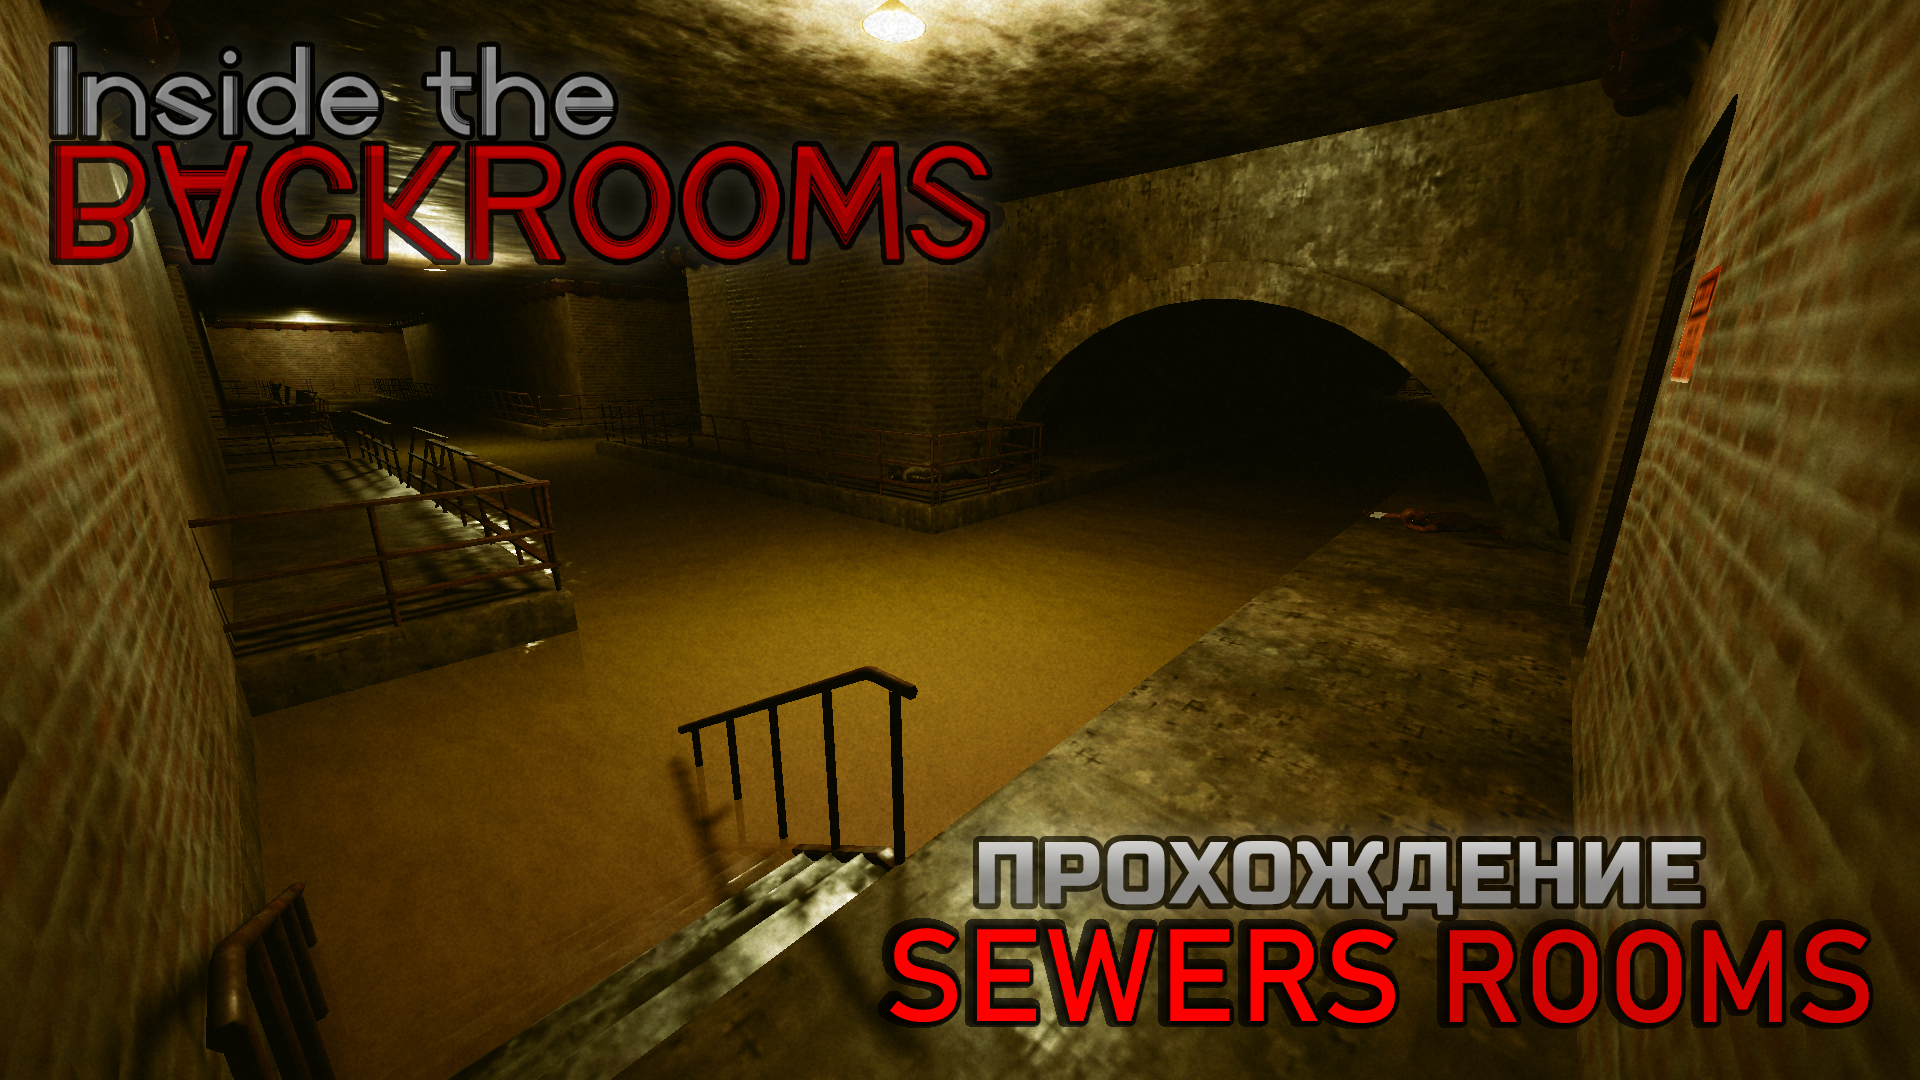 Sewers Rooms? I image 1